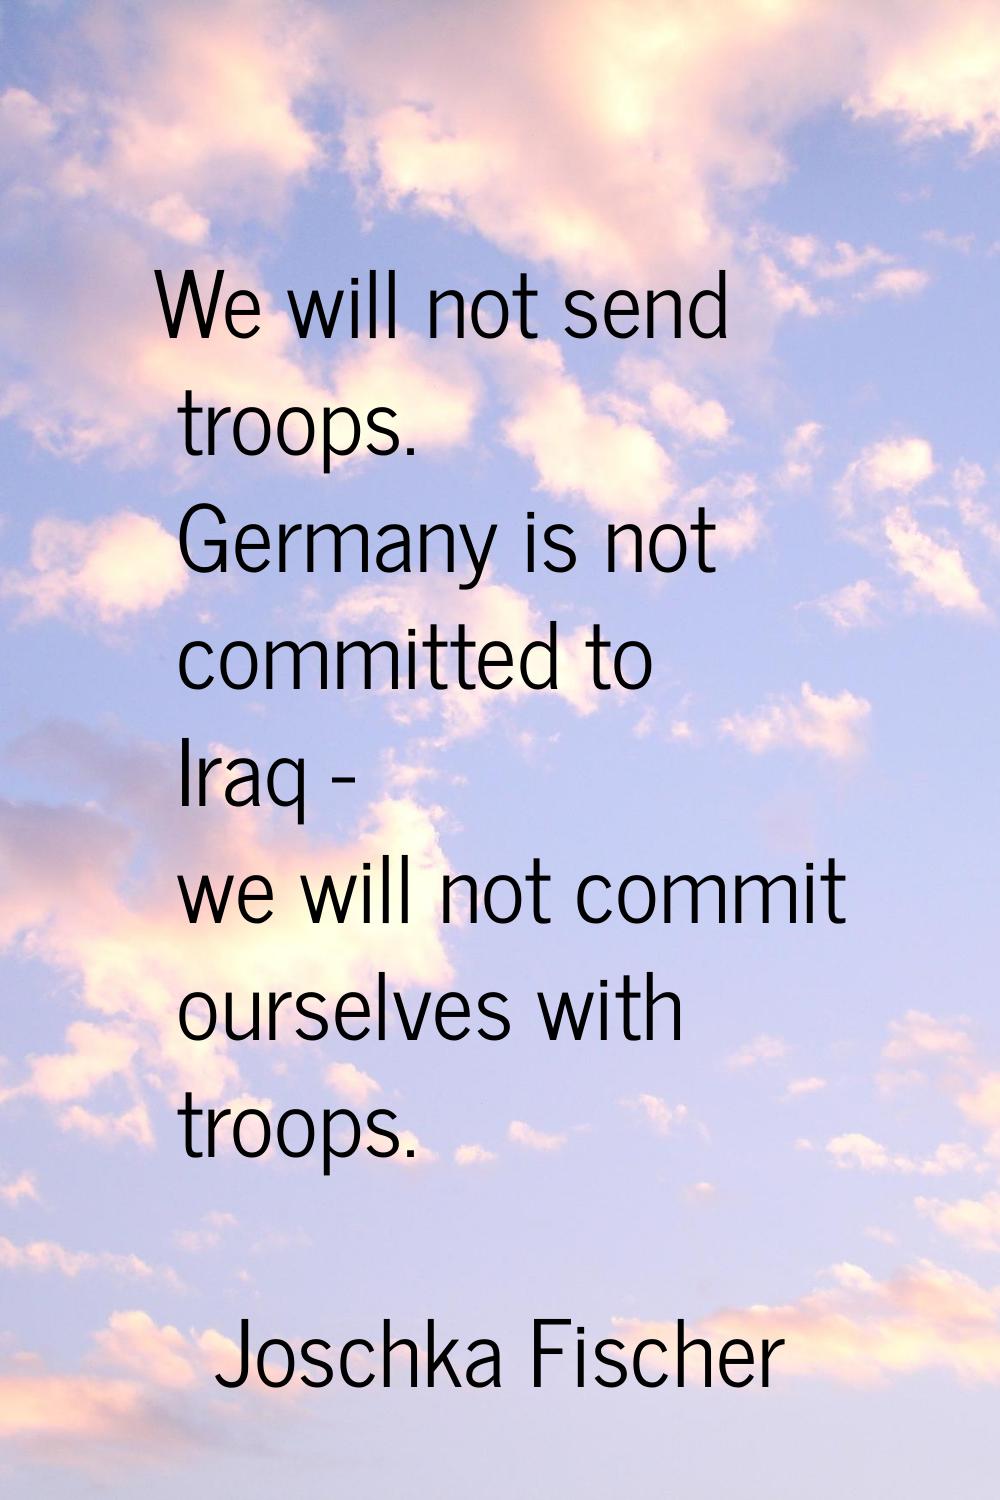 We will not send troops. Germany is not committed to Iraq - we will not commit ourselves with troop